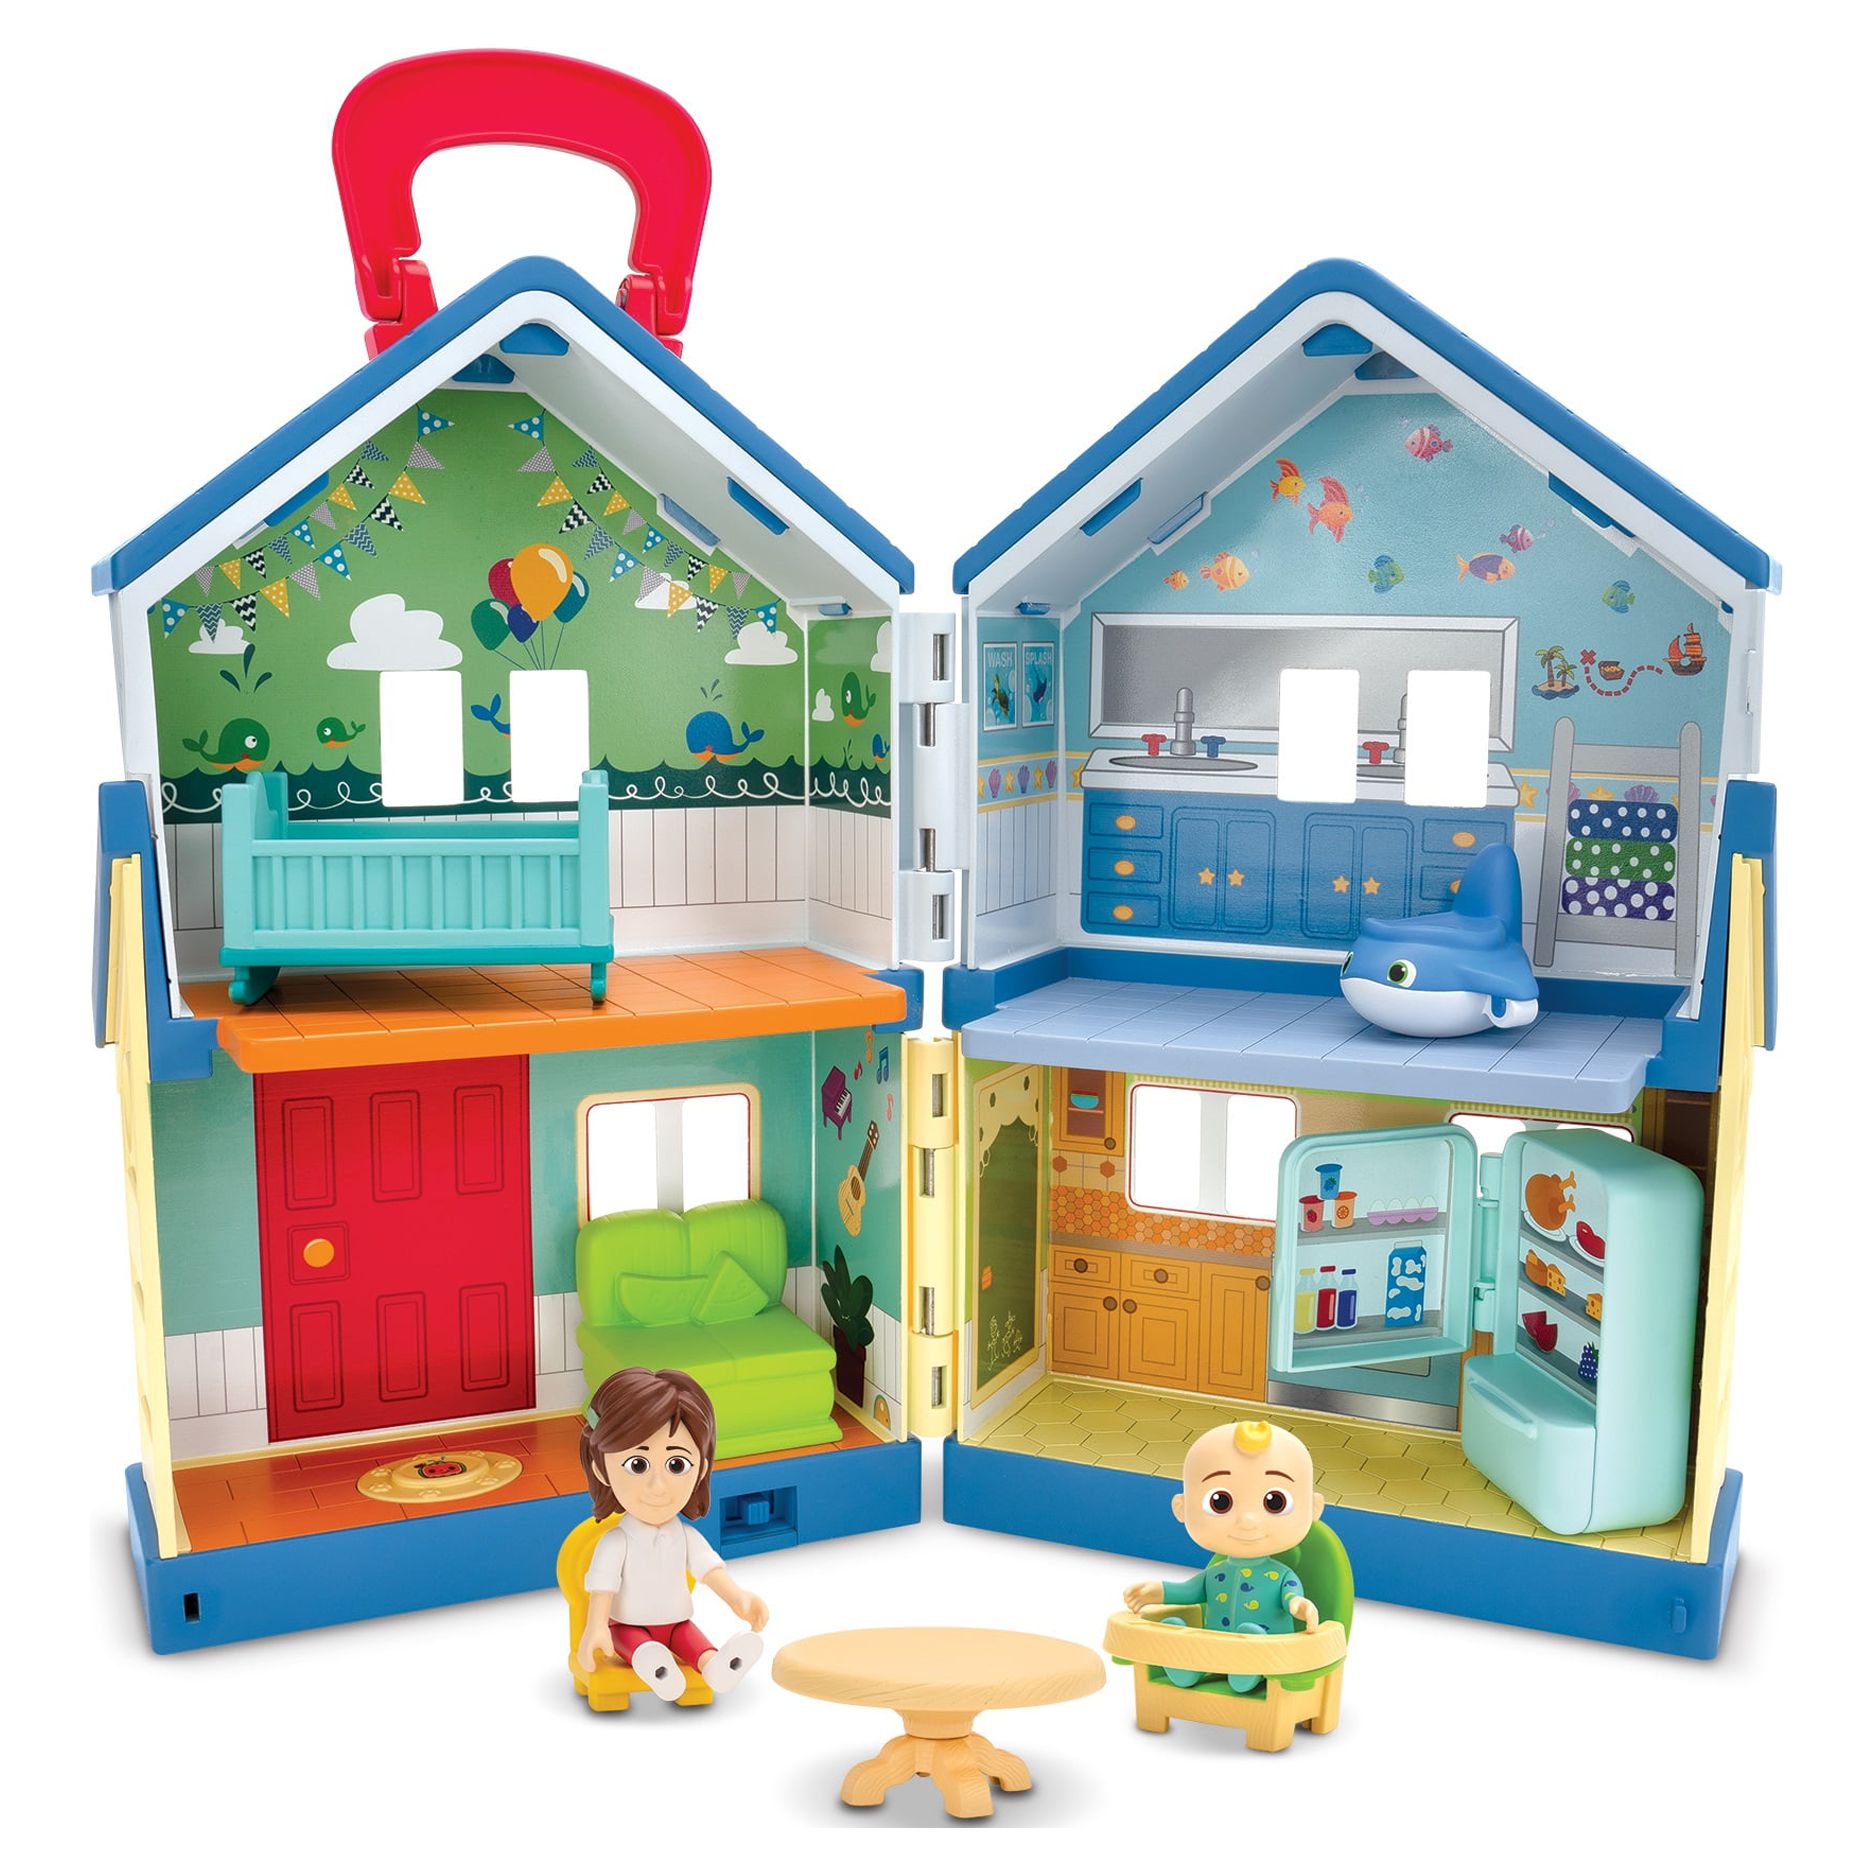 COCOMELON  DELUXE FAMILY HOUSE PLAYSET - image 1 of 9